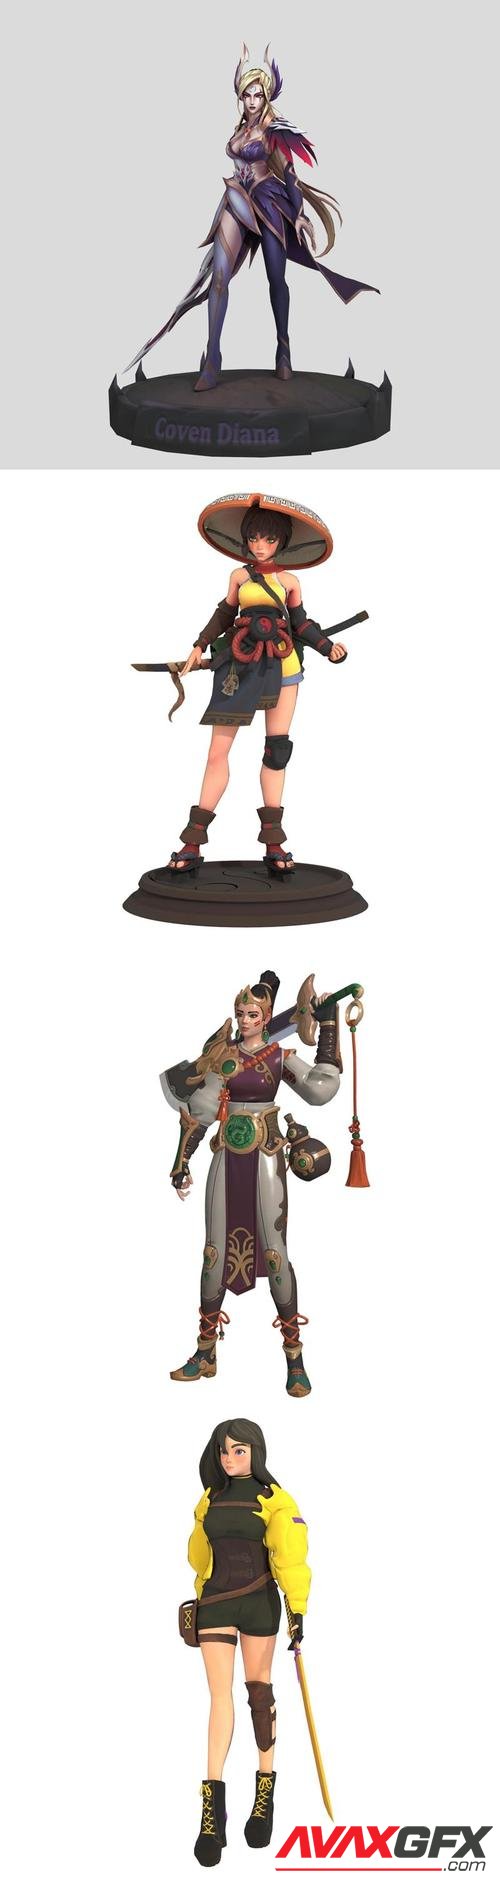 Tibet dragon and Radia and Coven Diana fanart and Kino the free soul – 3D Print